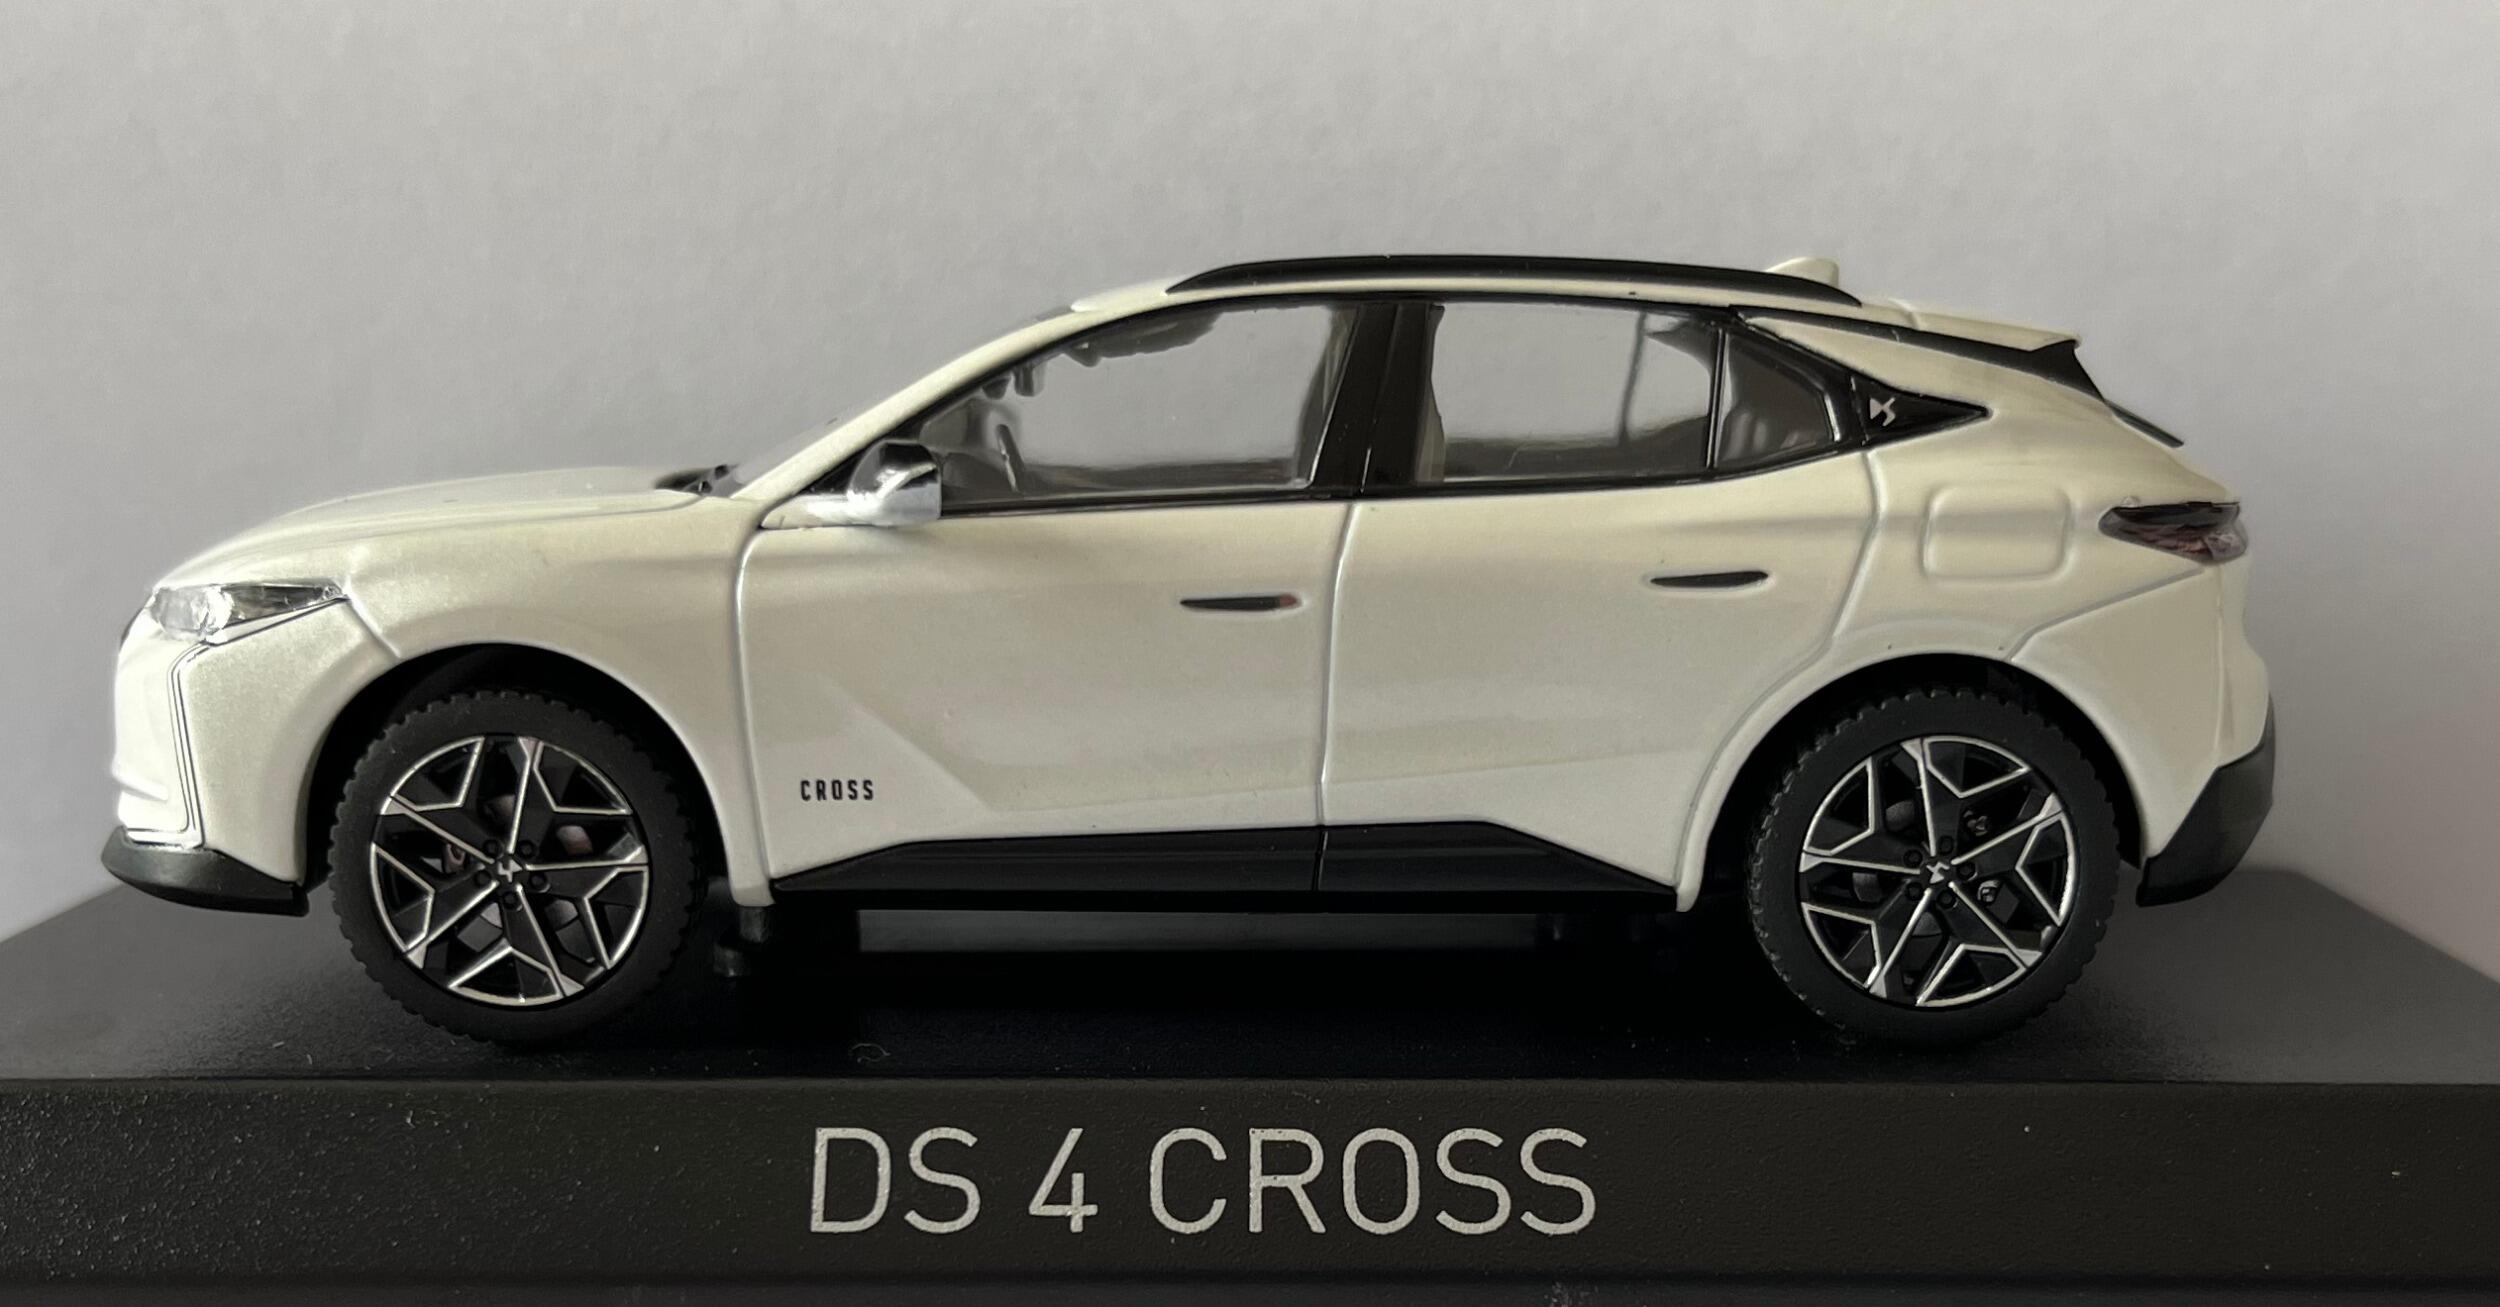 DS 4 Cross E-Tense 2021 in pearl white, 1:43 scale diecast car model from Norev, 170045